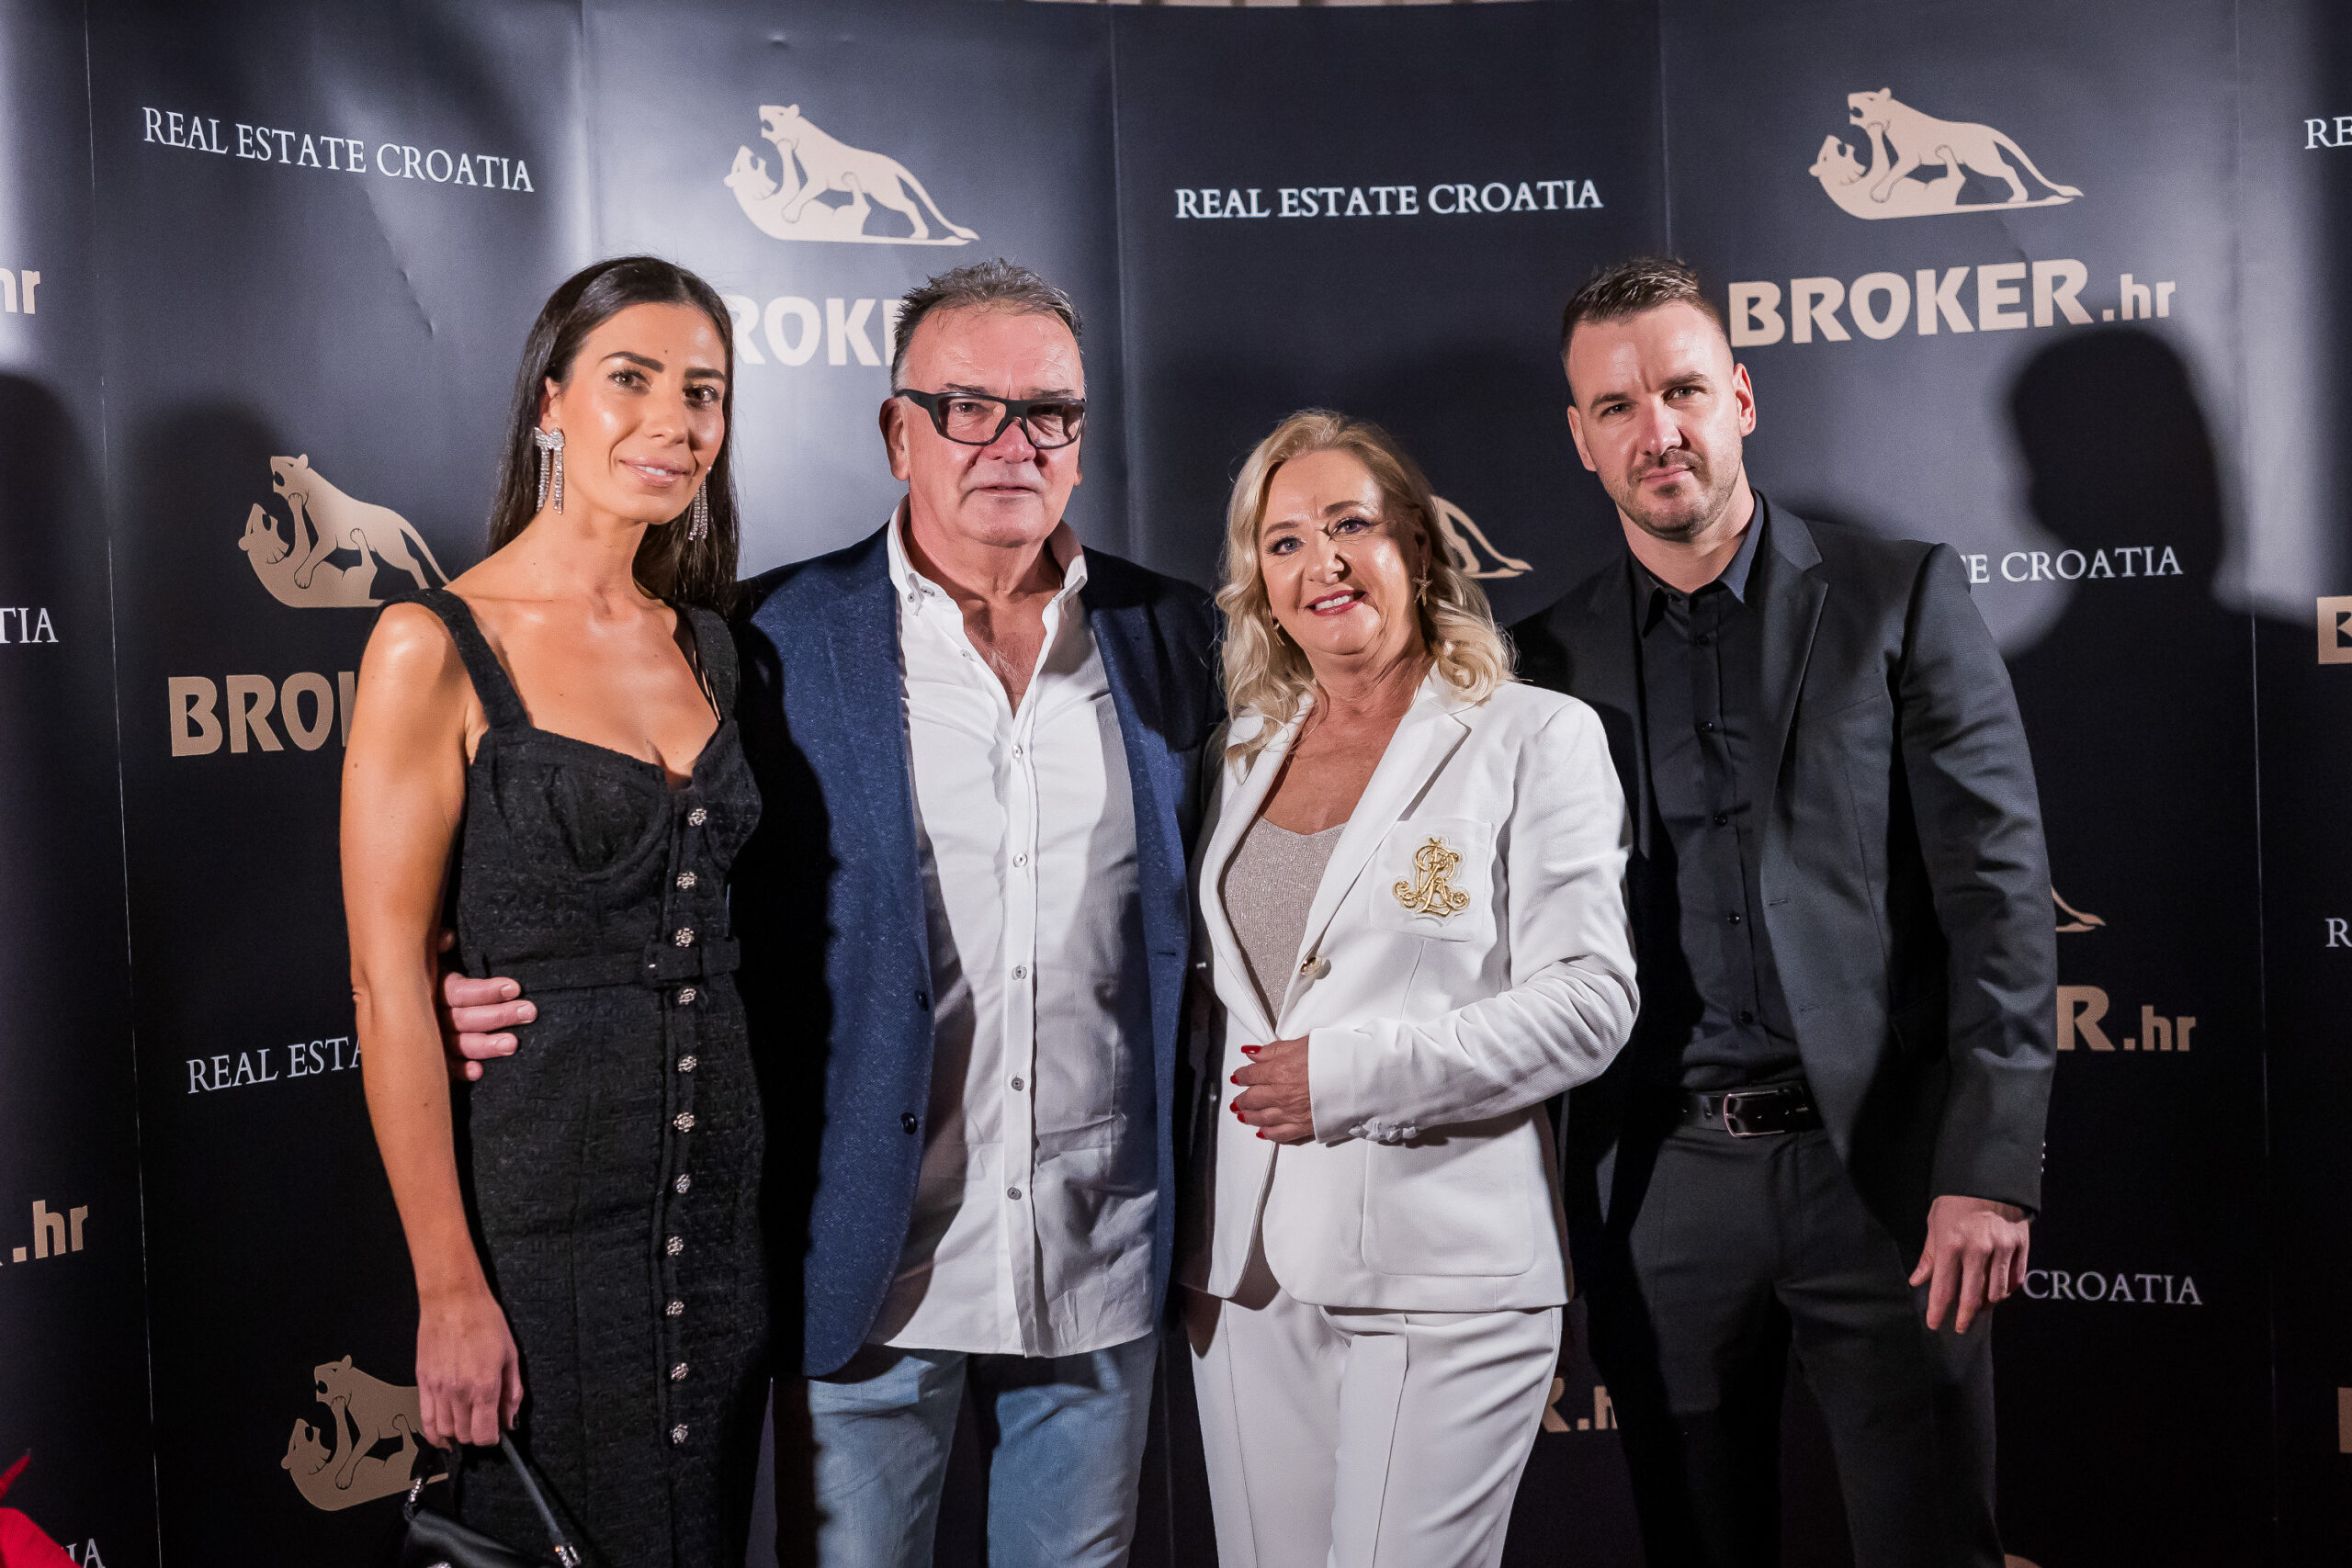 Dino Vulić (right) stands with his wife, Andrea (left), and his parents Ivica (center right) and Meri Vulić (center left).